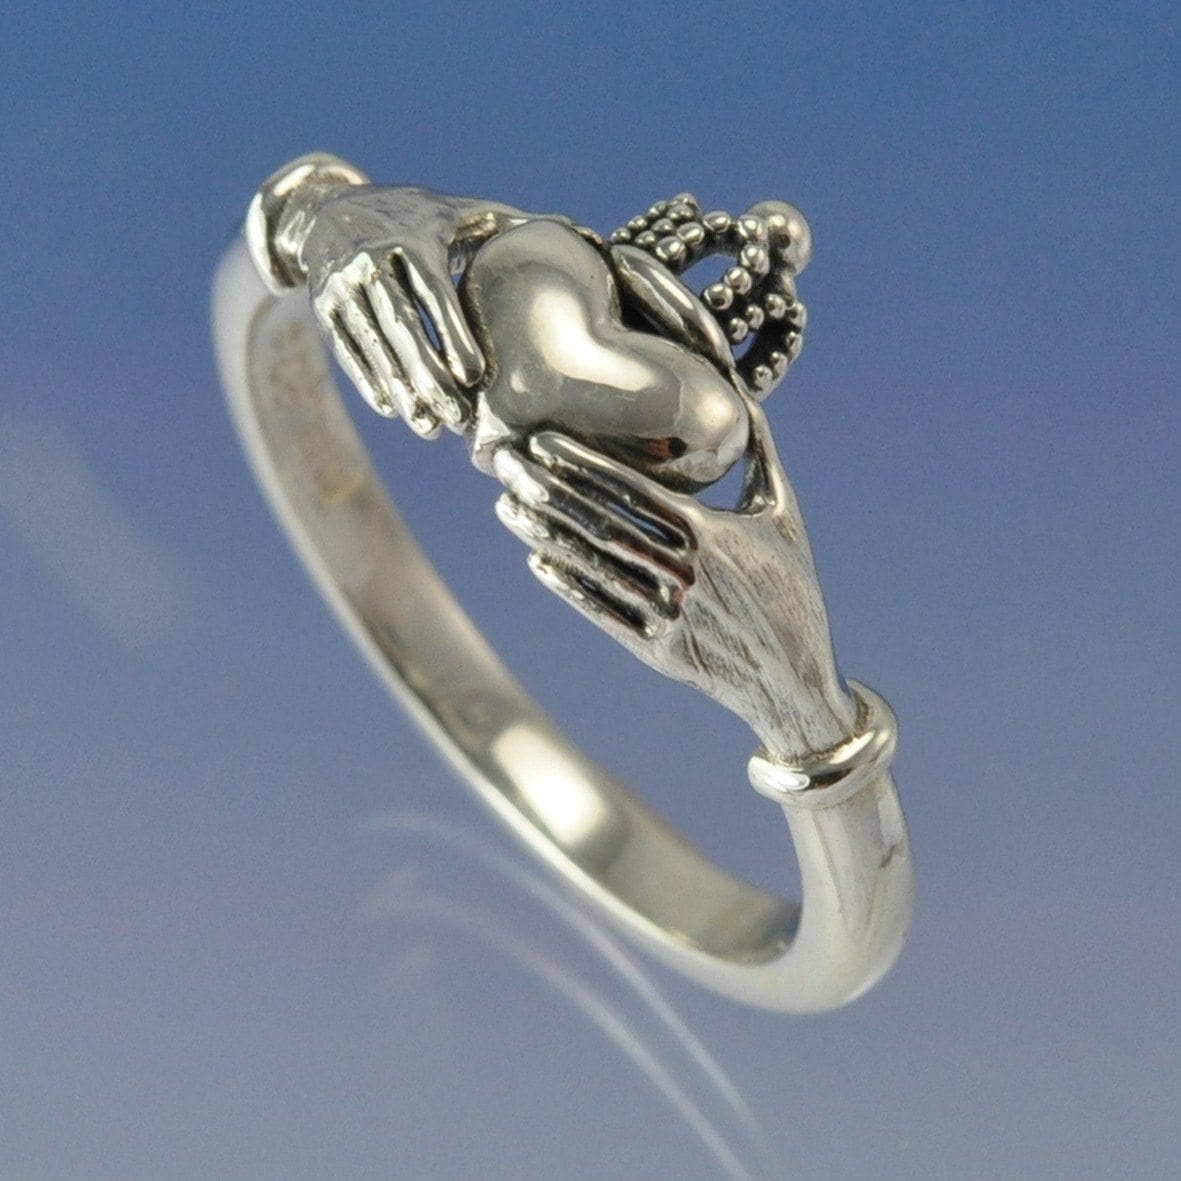 Cremation Ash Claddagh Ring Ring by Chris Parry Jewellery